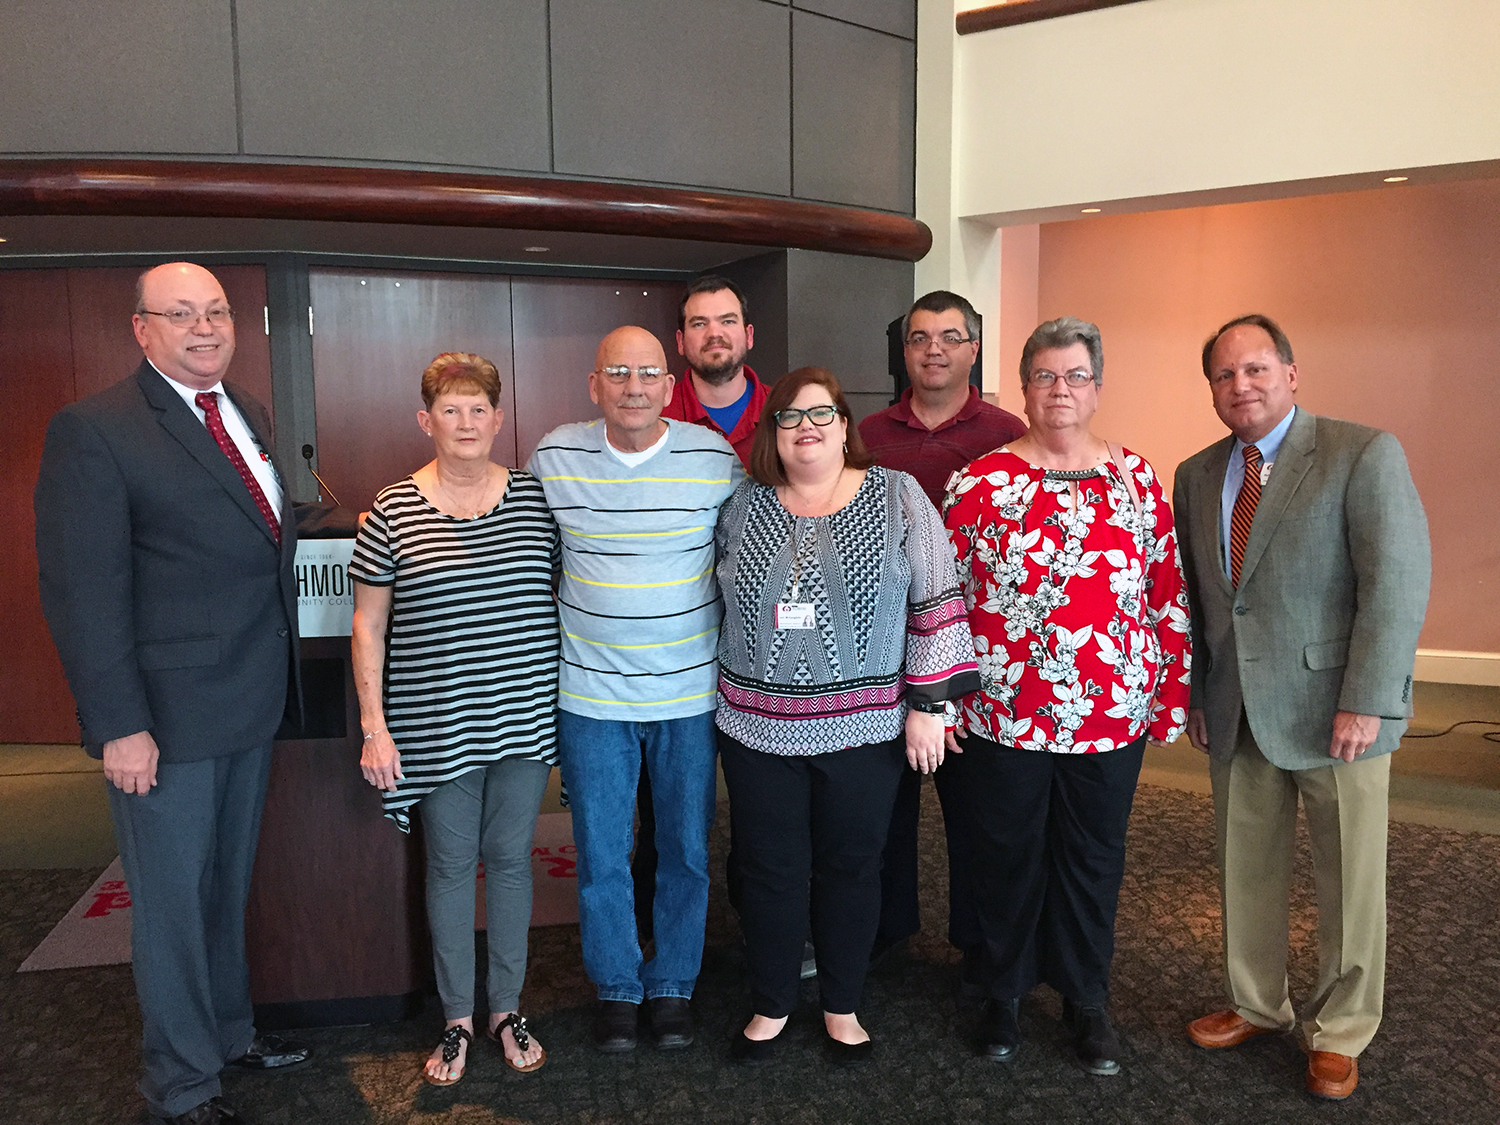 The family of Jo Ann McLaughlin recently established a Richmond Community College scholarship in her memory. Pictured, in front, from left to right, are Dr. Dale McInnis, president of RichmondCC; Pagen McLaughlin; Danny McLaughlin; Lori McLaughlin; Brenda Bennett; and Dr. Hal Shuler, associate vice president of development; in back, from left to right, Erik McLaughlin and Chris Bennett.